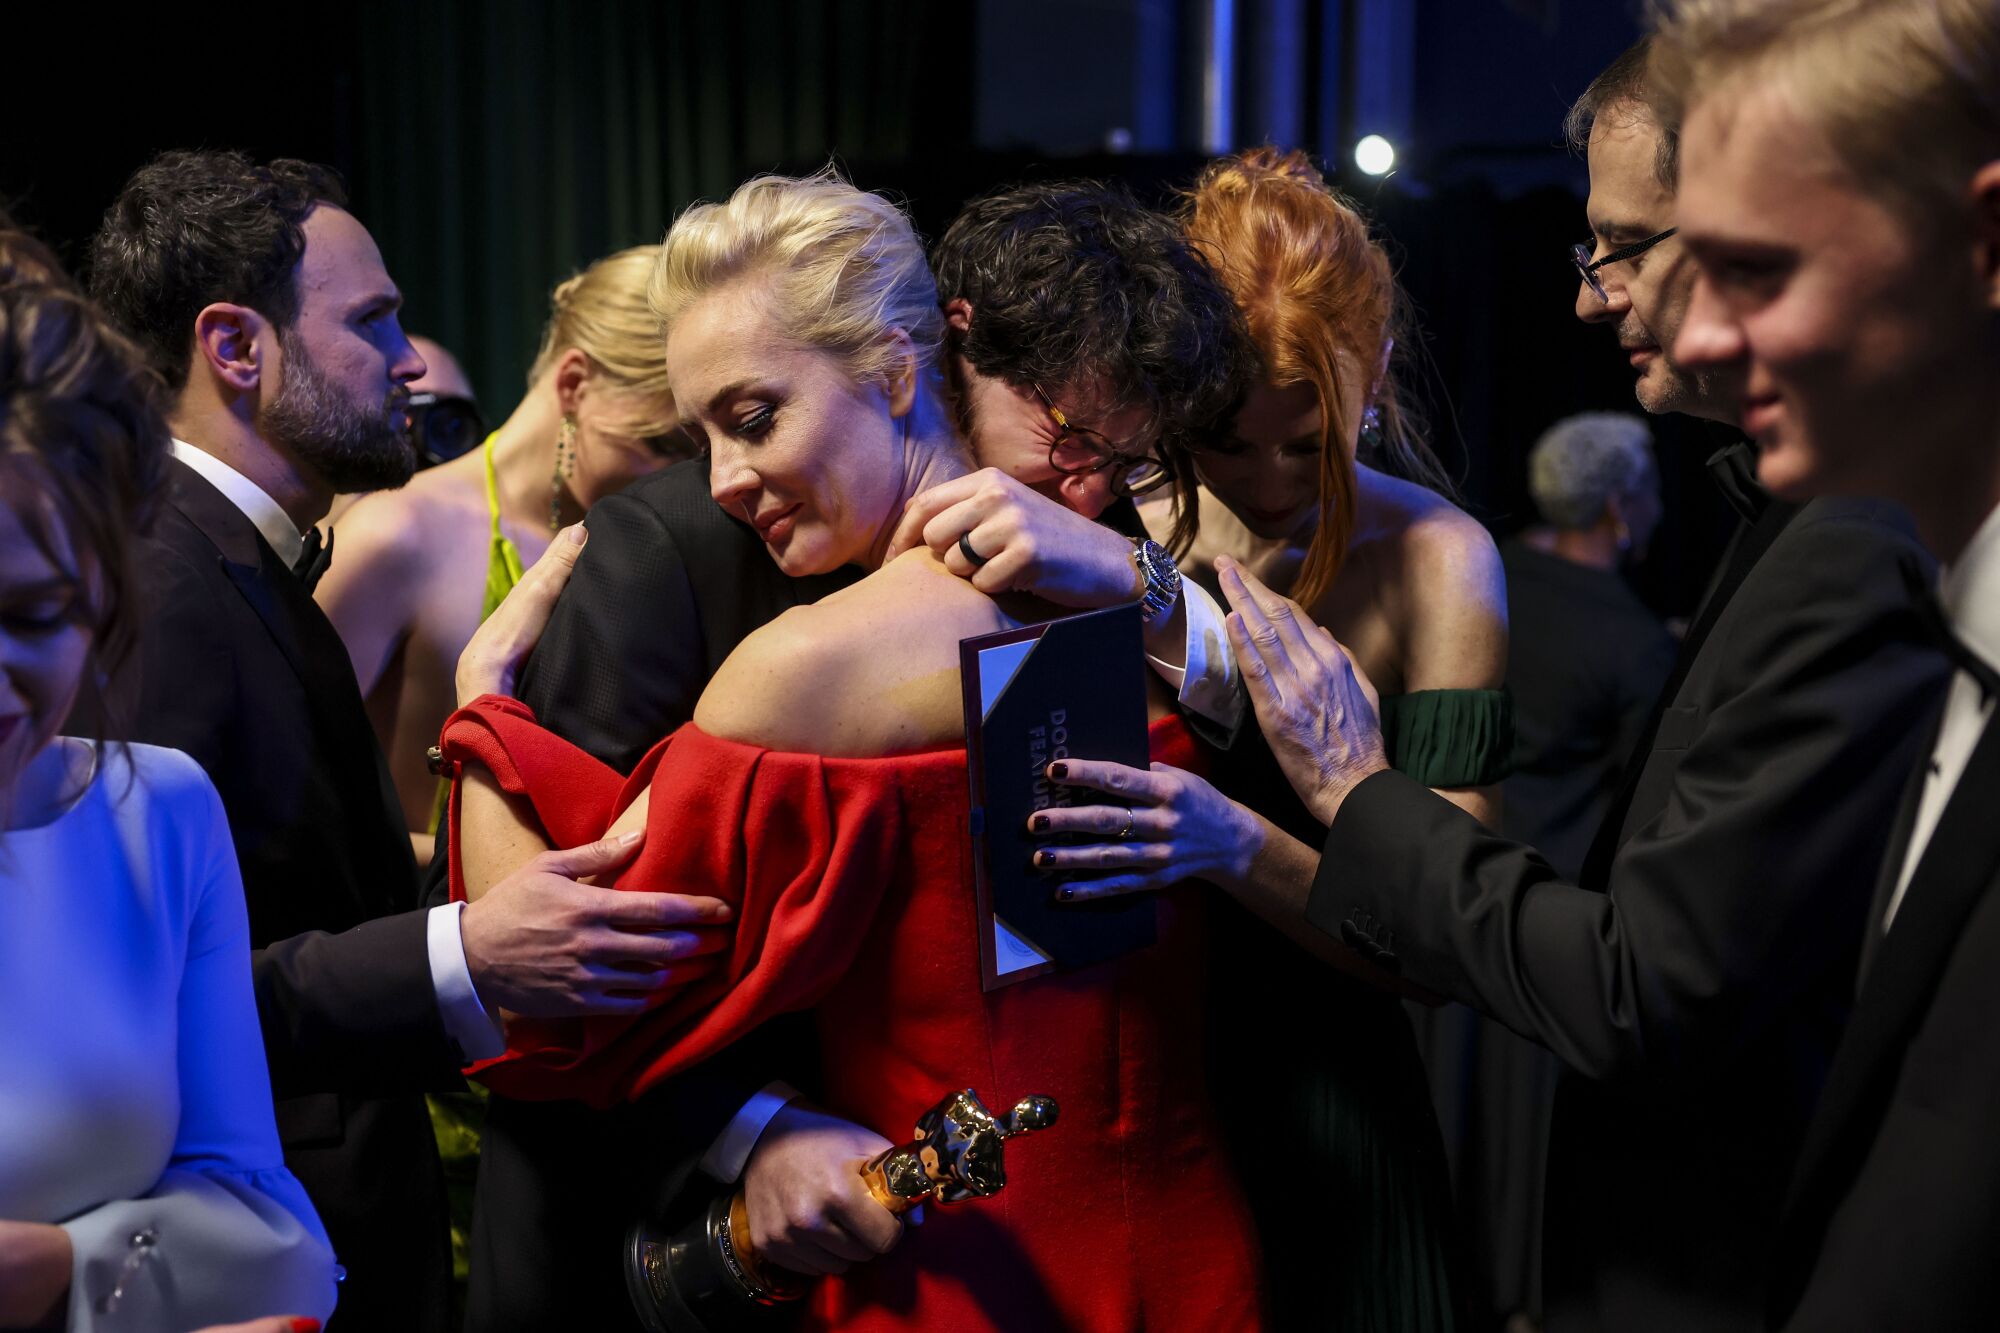 A man and a woman embrace amid a crowd backstage at the 95th Academy Awards at the Dolby Theatre.